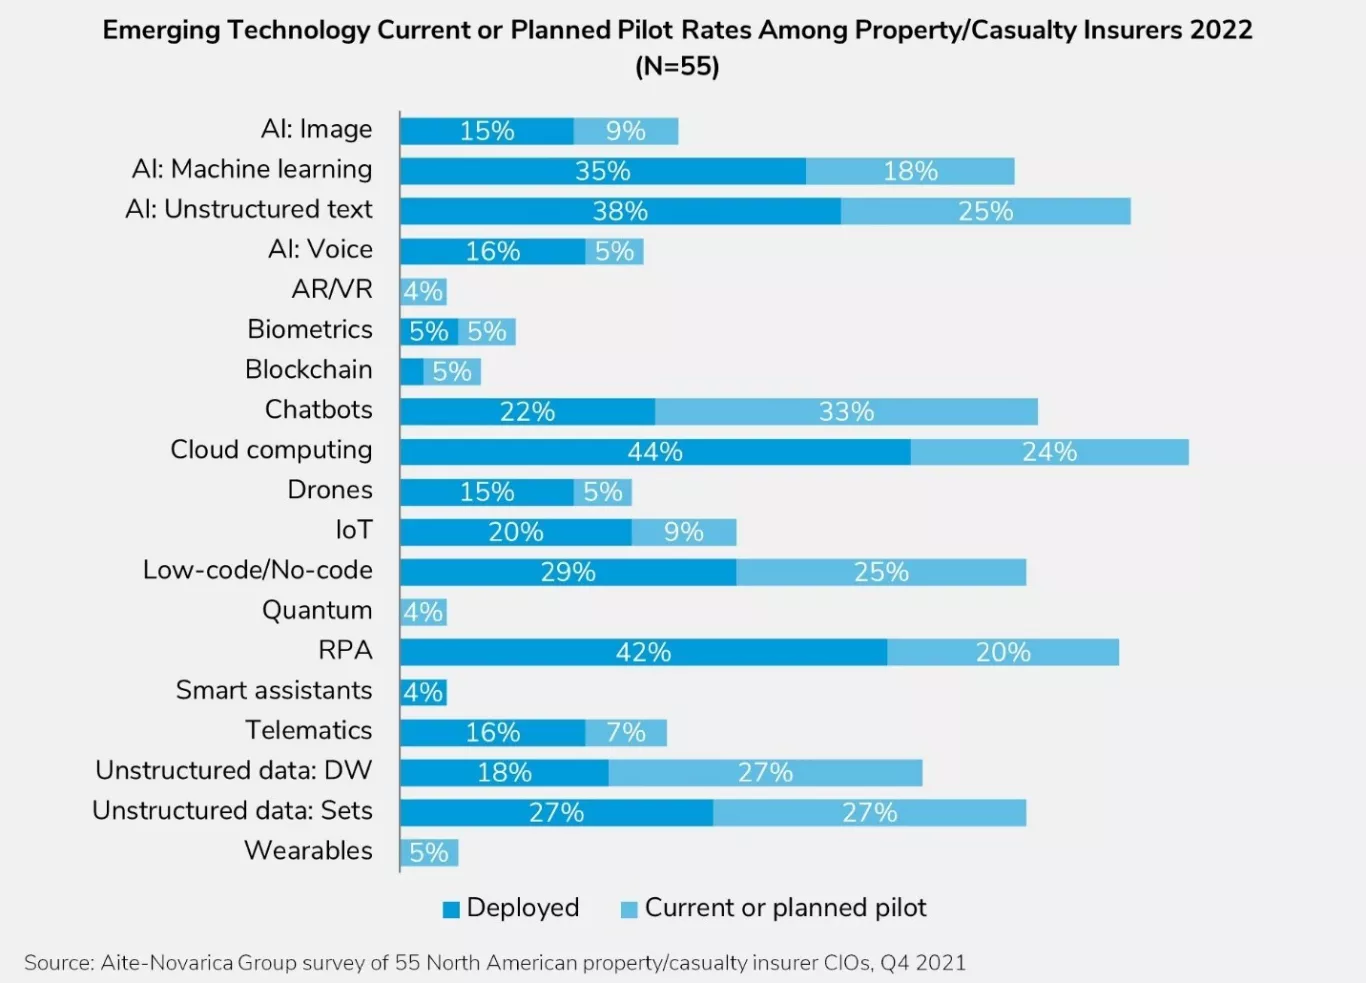 Emerging Technology Current or Planned Pilot Rates Among Property/Casualty Insurers 2022